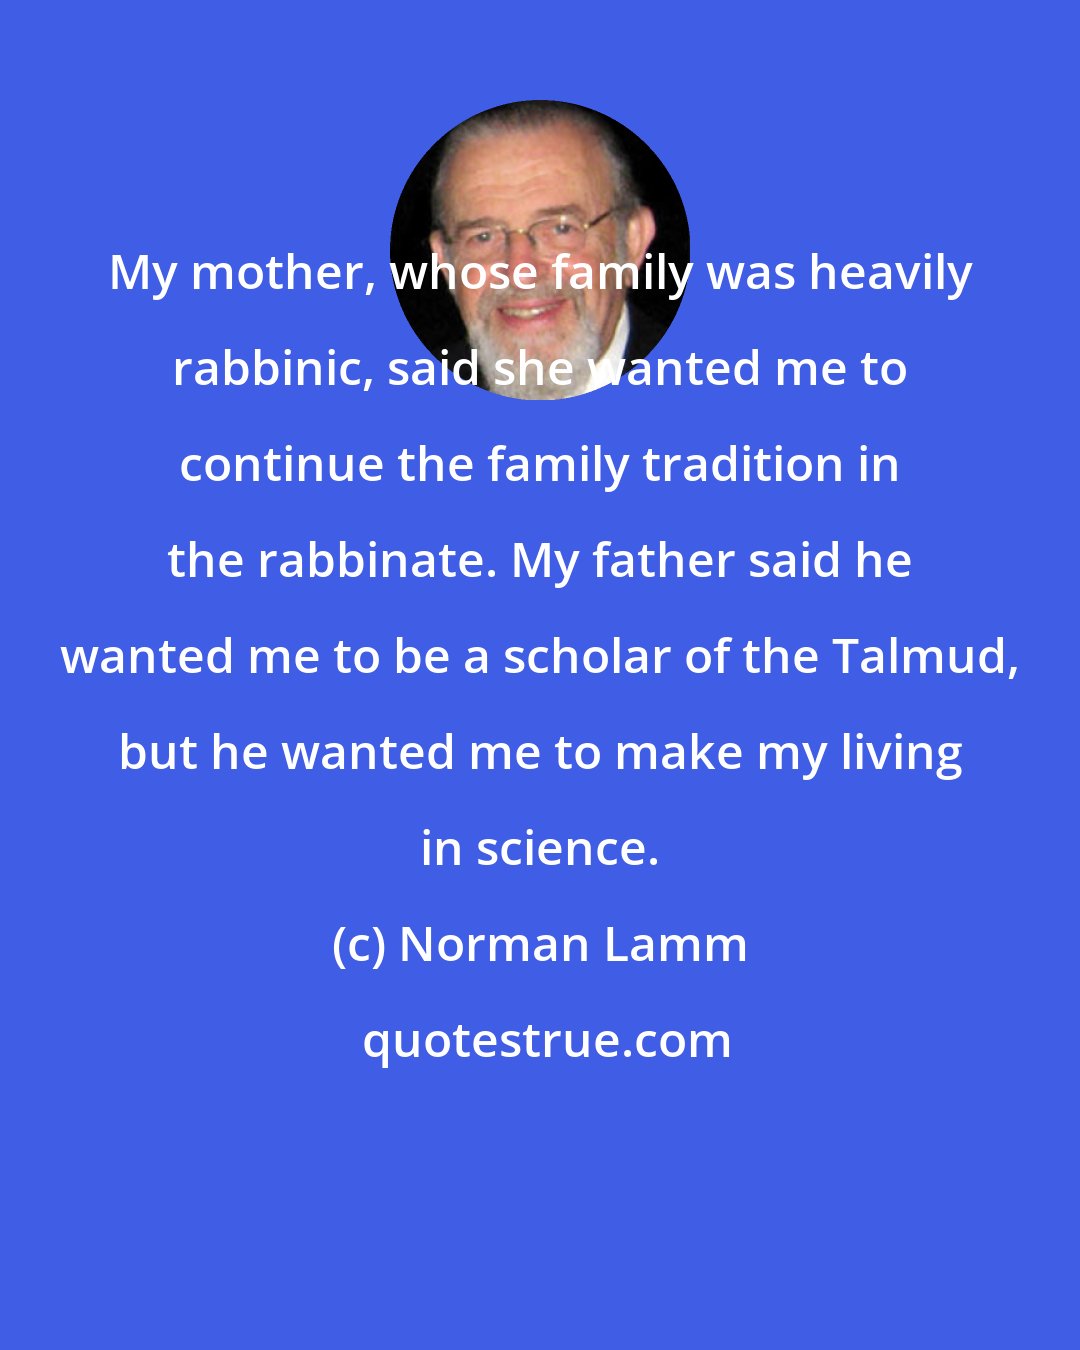 Norman Lamm: My mother, whose family was heavily rabbinic, said she wanted me to continue the family tradition in the rabbinate. My father said he wanted me to be a scholar of the Talmud, but he wanted me to make my living in science.